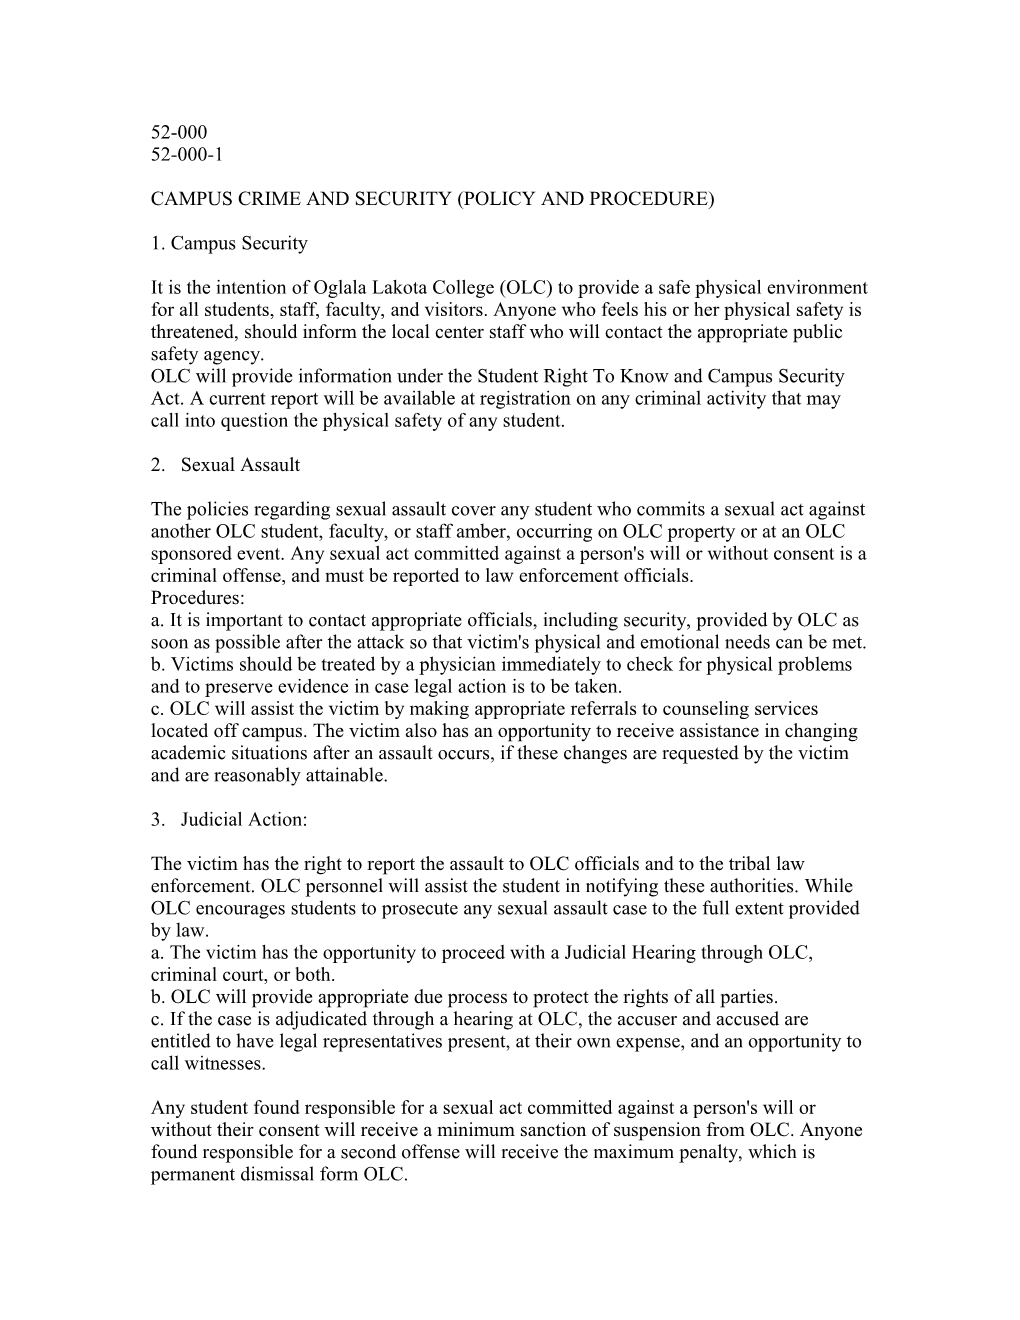 Campus Crime and Security (Policy and Procedure)